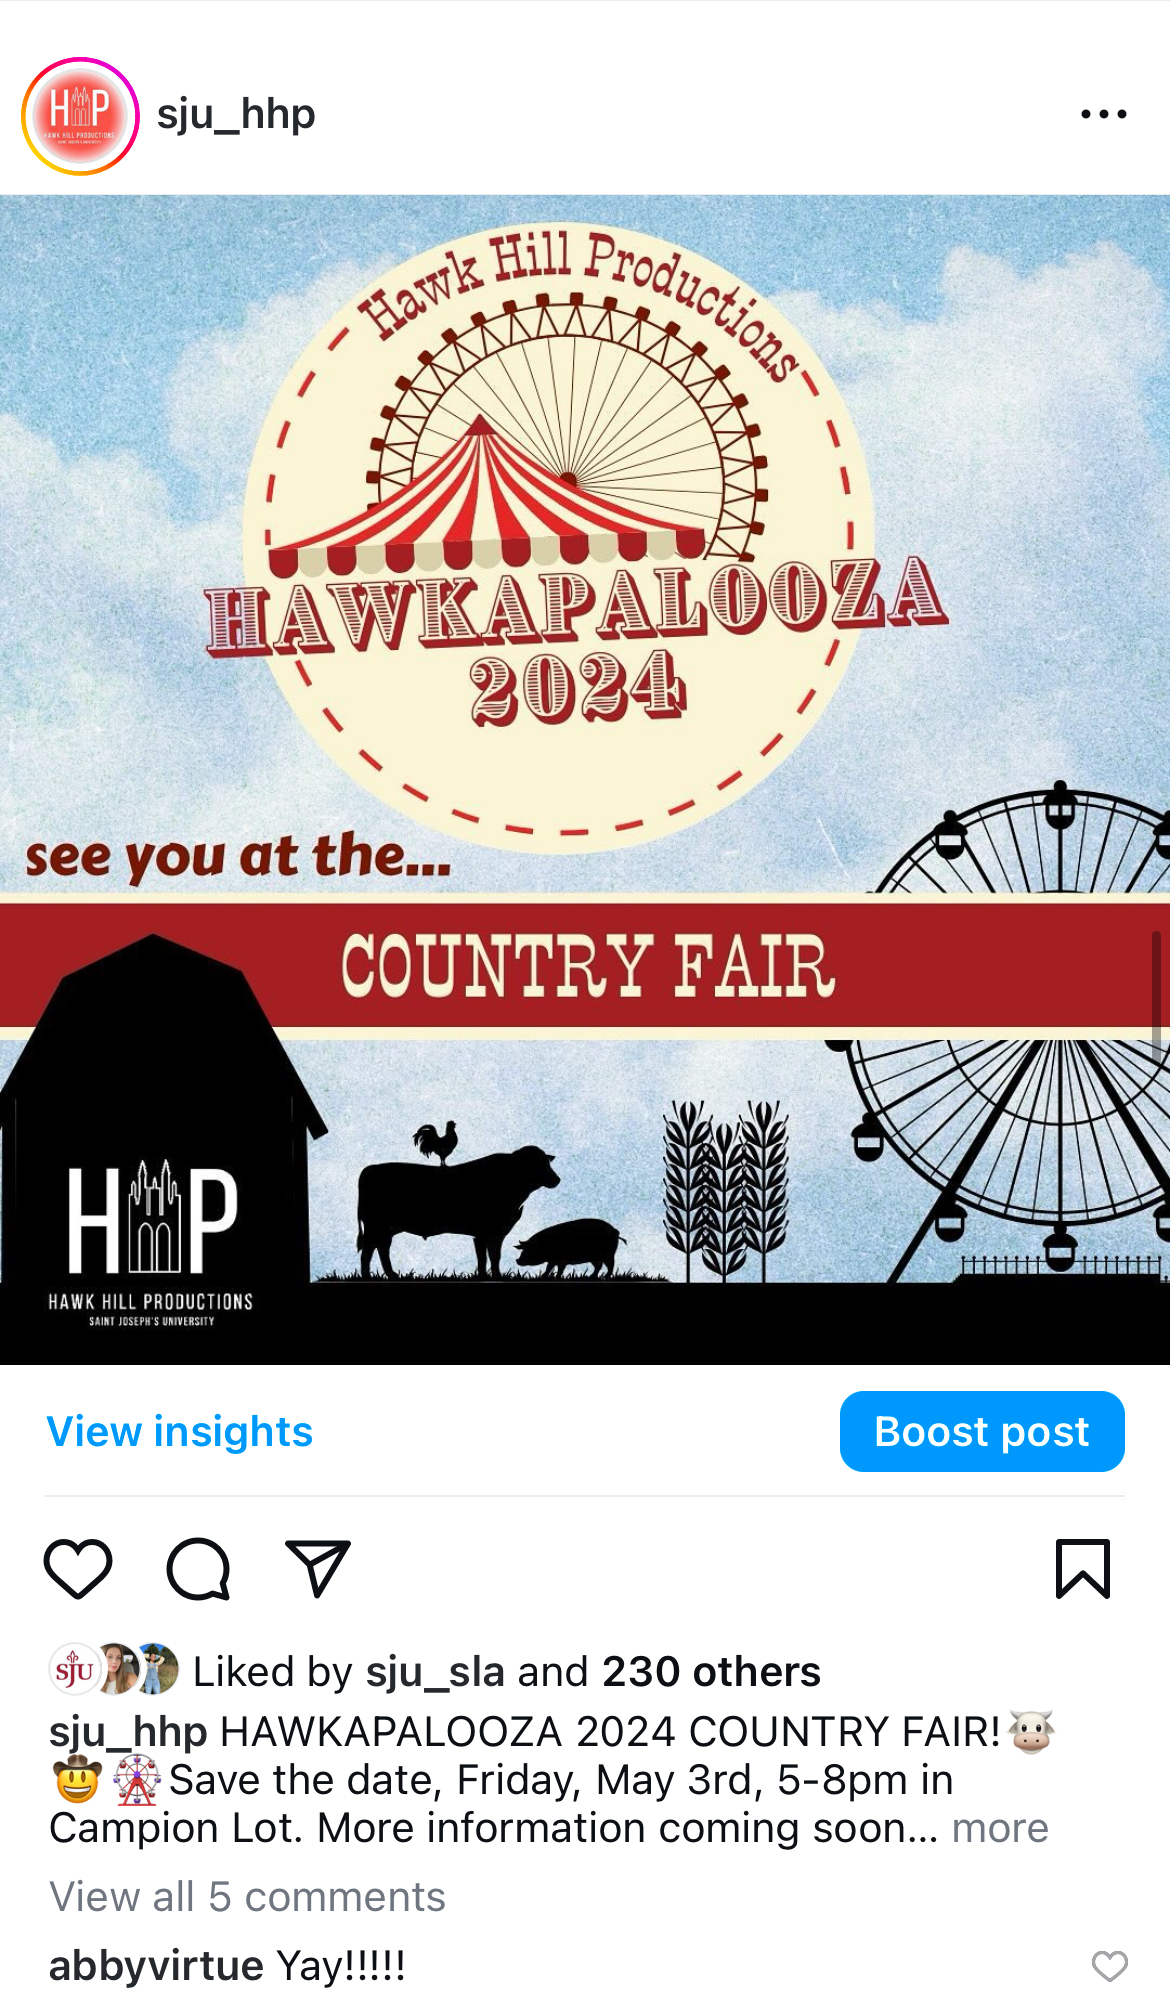 This is an instagram post revealing the theme for an end of year event at SJU. The background of the image is a sky with clouds, with the hawkapalooza logo on top featuring a ferris wheel and carnival tent over the text. At the bottom of the image are silouhettes of a barn, farm animals, and a ferris wheel.